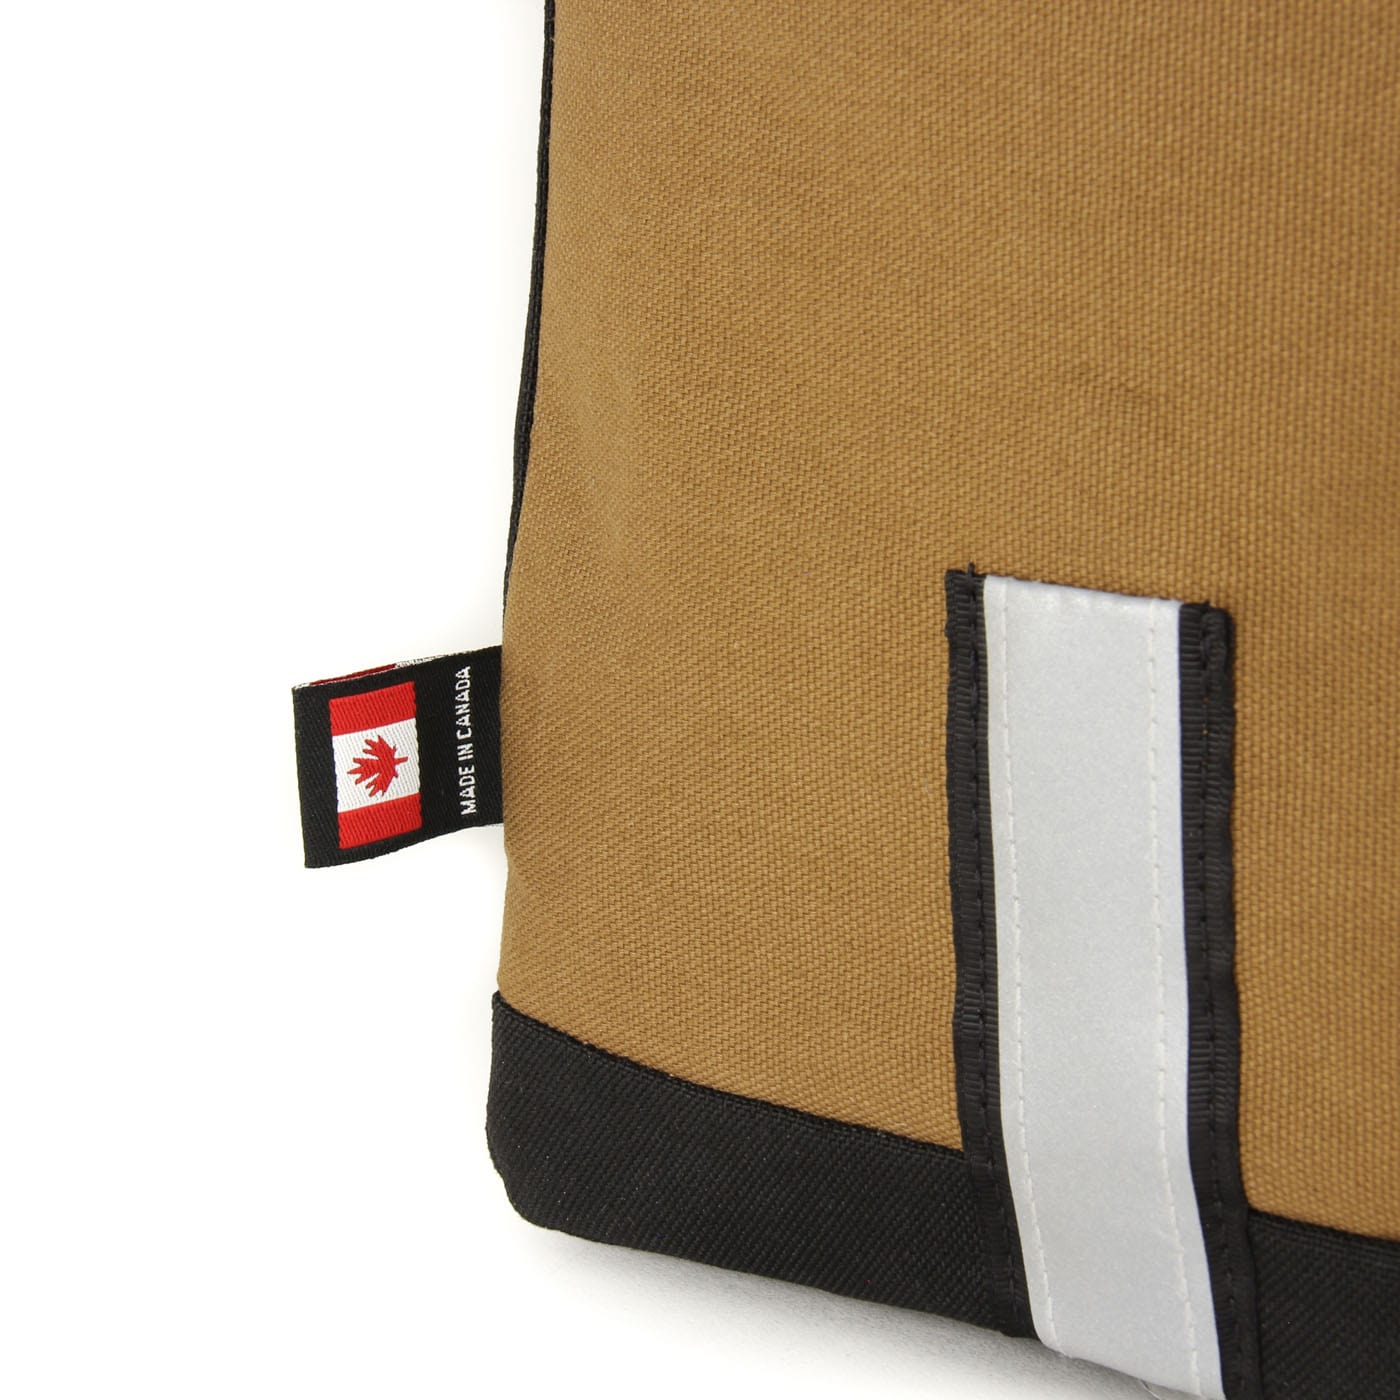 The Signature V waterproof urban laptop pannier is proudly made in Canada